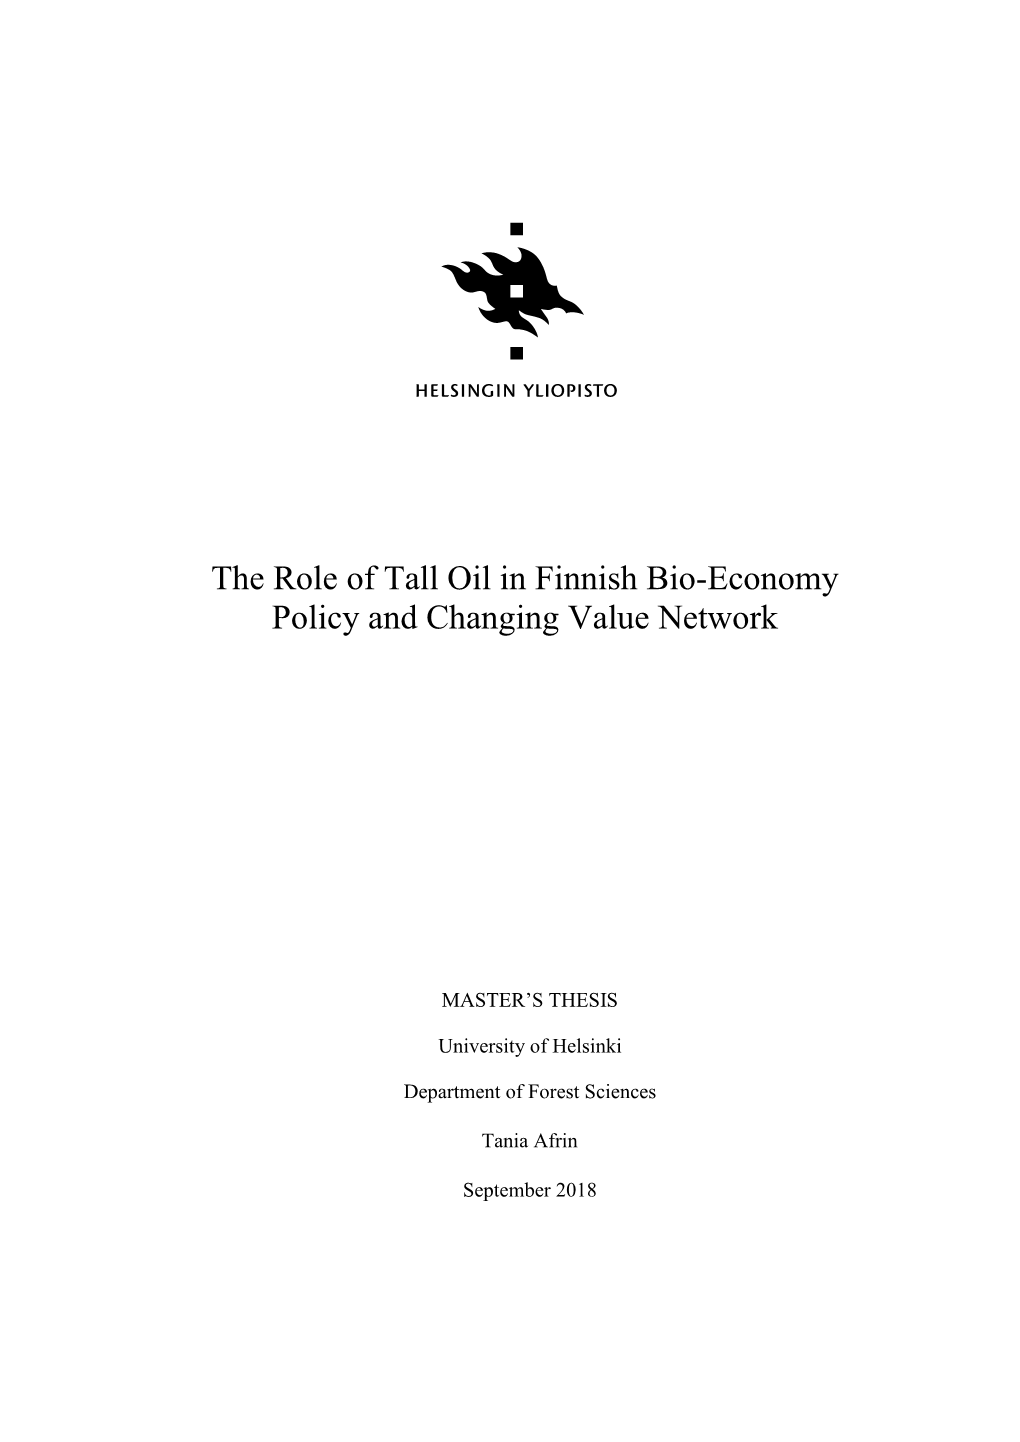 The Role of Tall Oil in Finnish Bio-Economy Policy and Changing Value Network